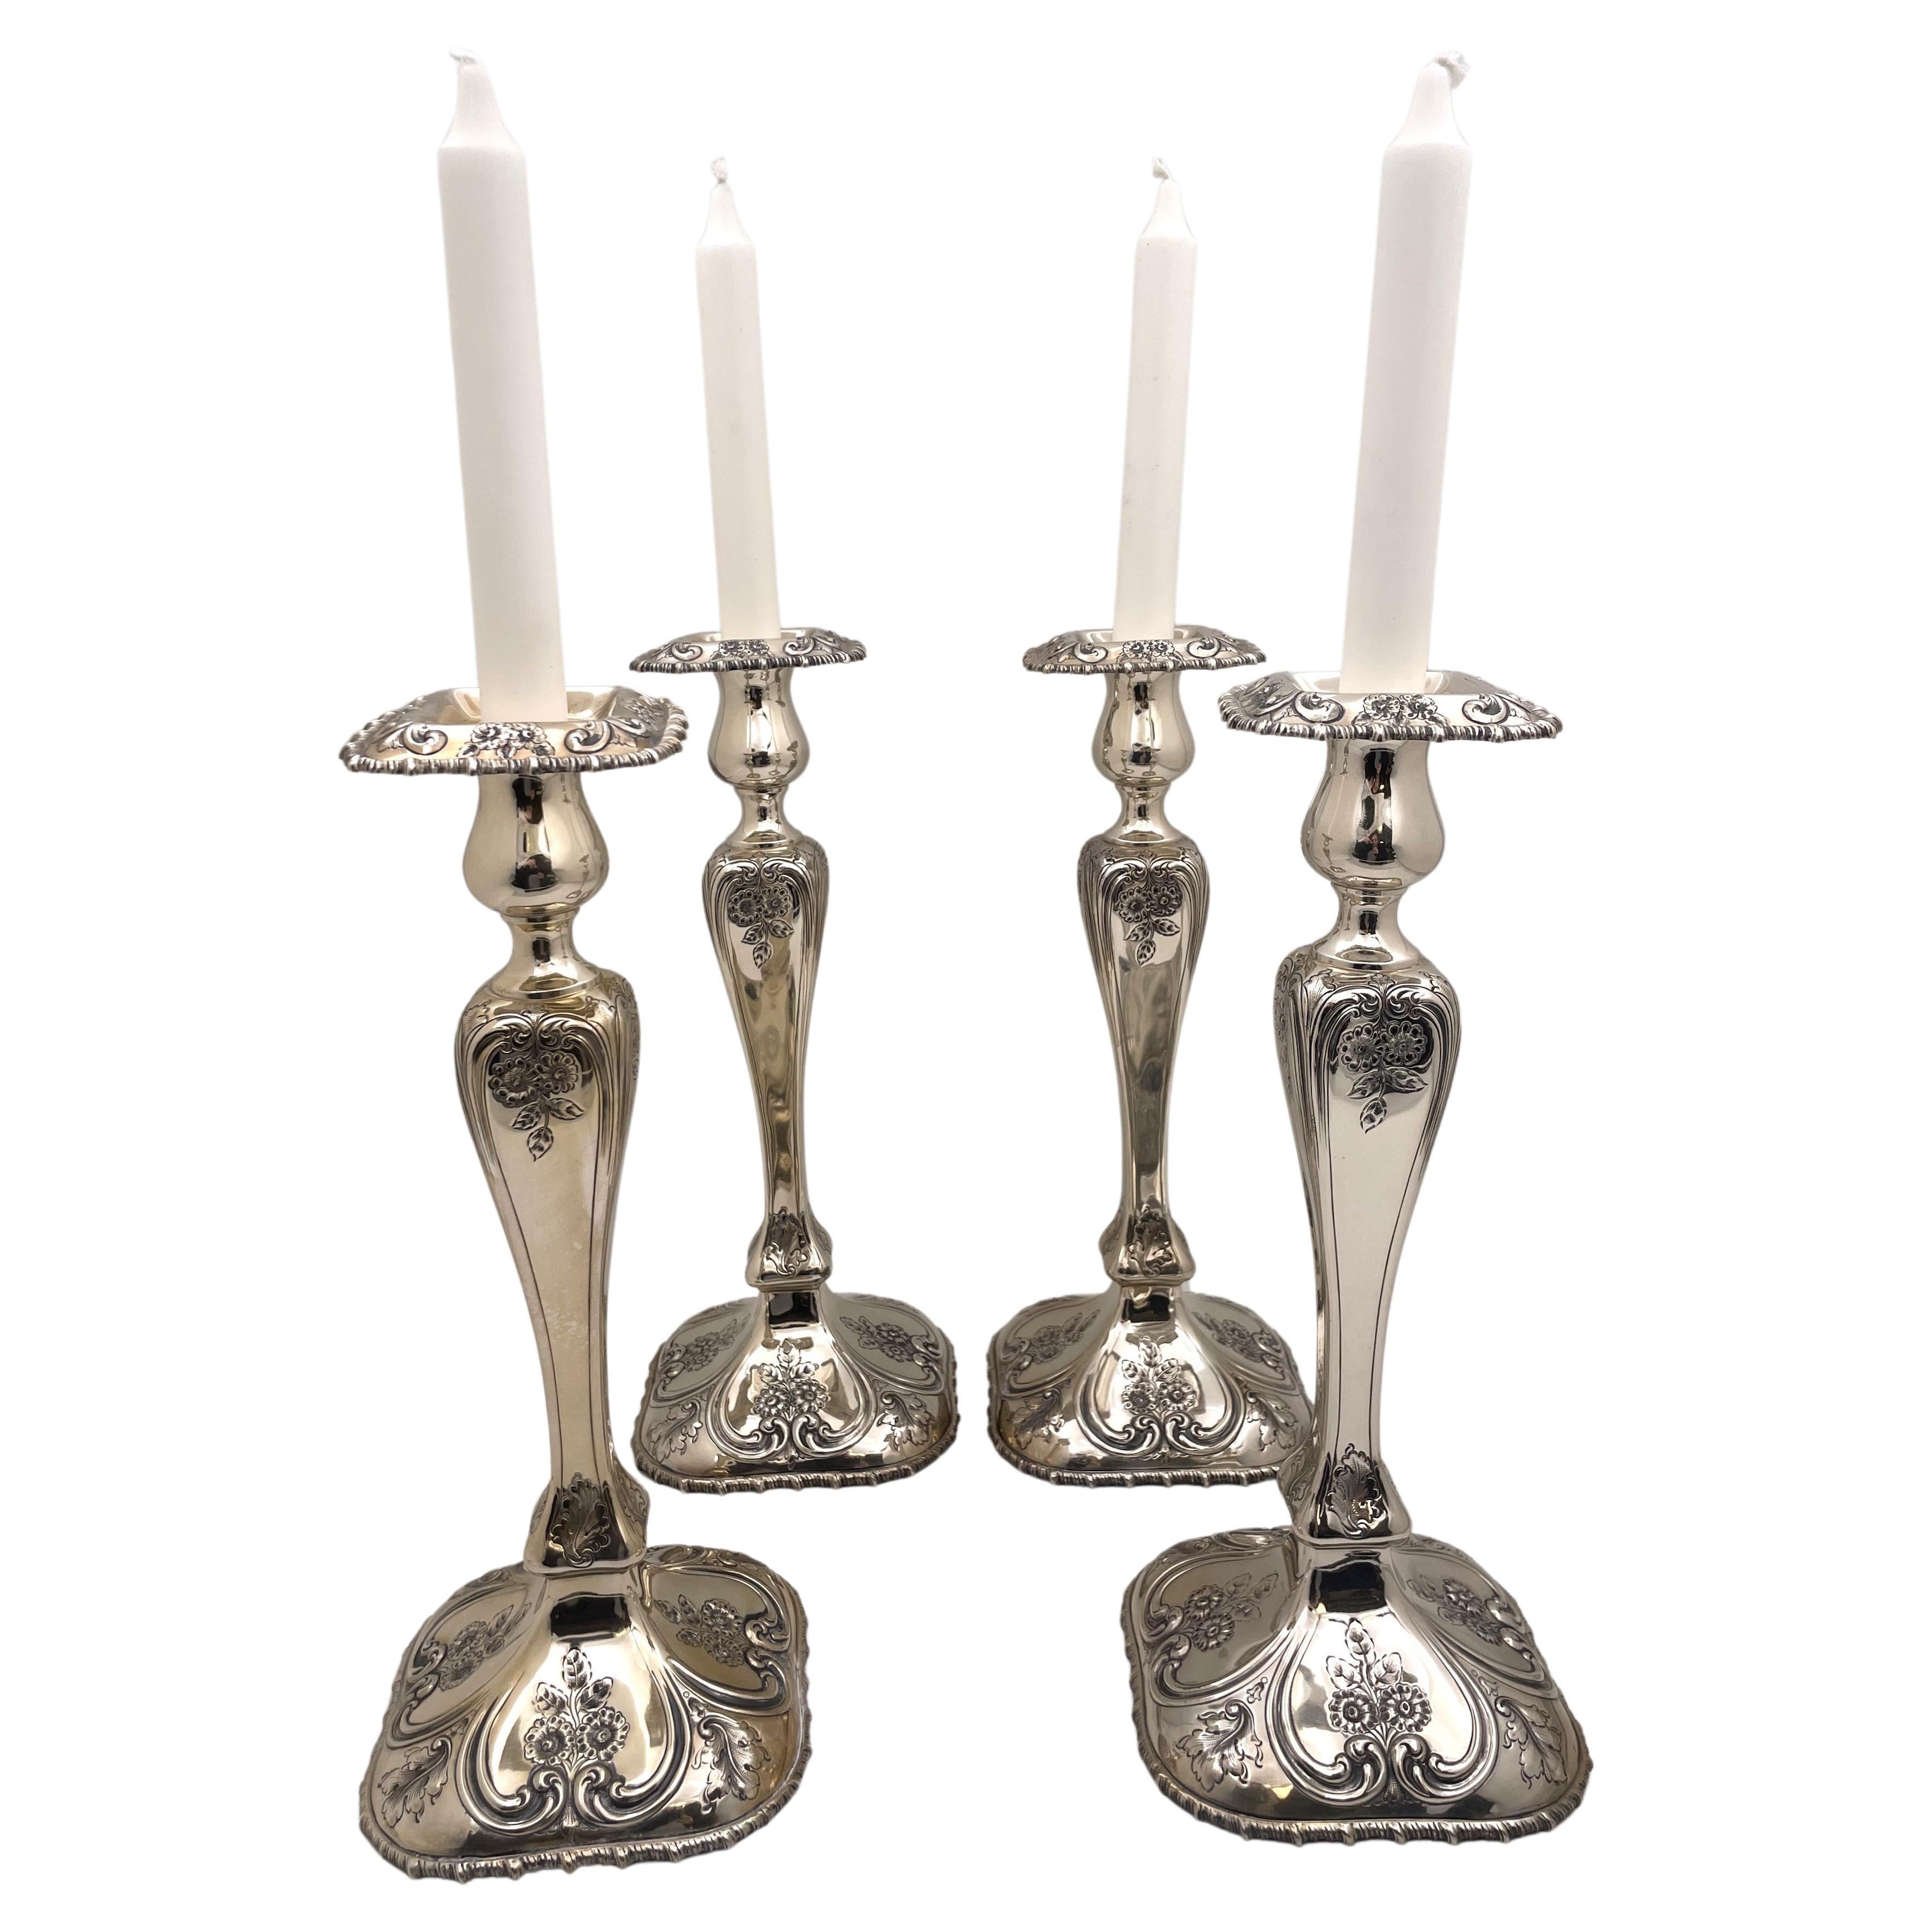 Shreve & Co. Set of 4 Sterling Silver Candlesticks in Art Nouveau Style For Sale